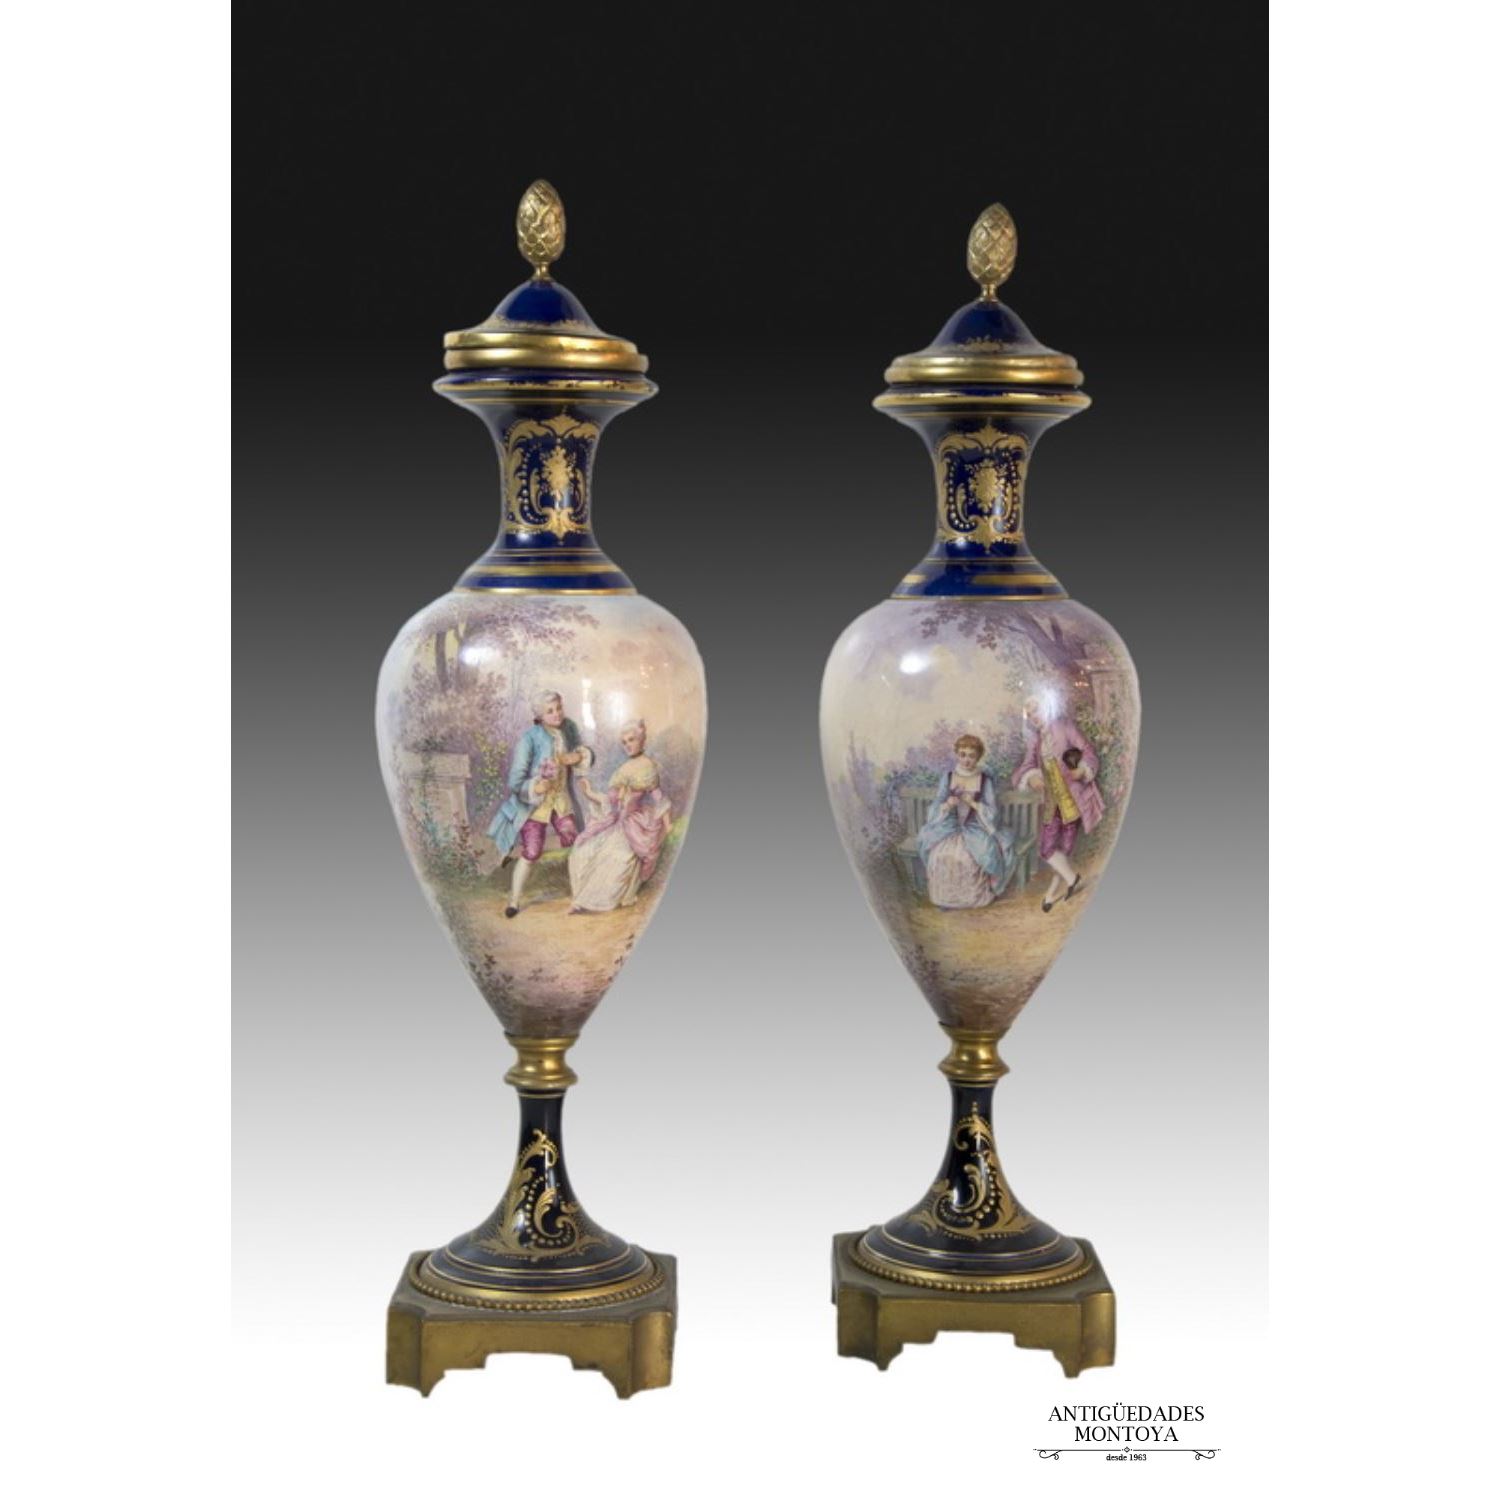 Pair of vases from Sèvres, circa 1756.